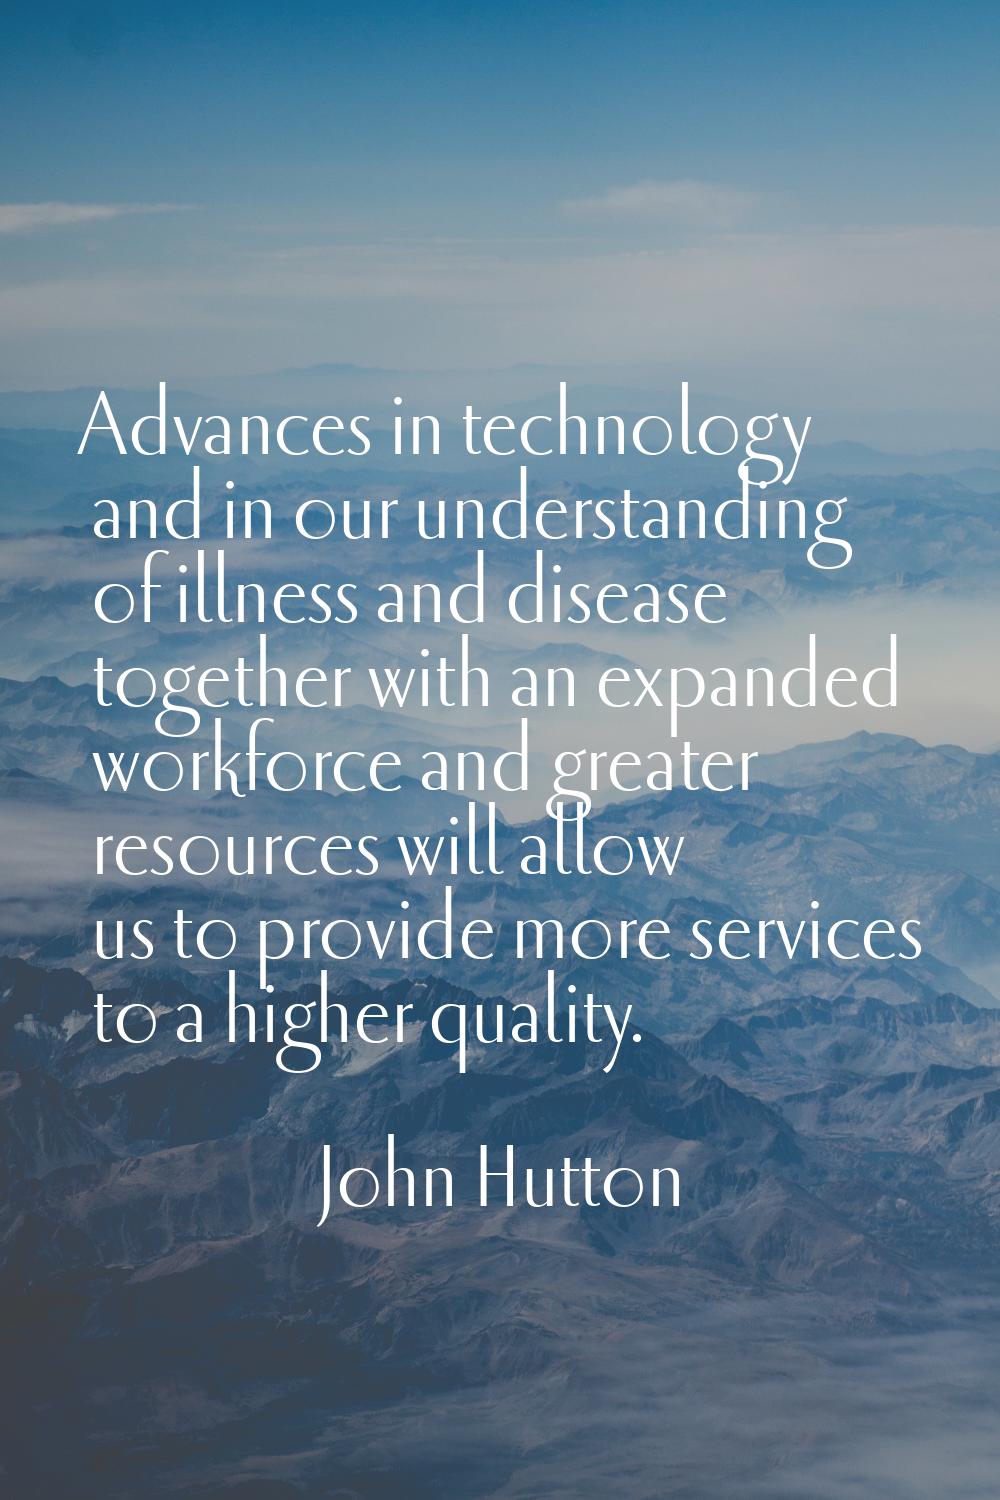 Advances in technology and in our understanding of illness and disease together with an expanded wo